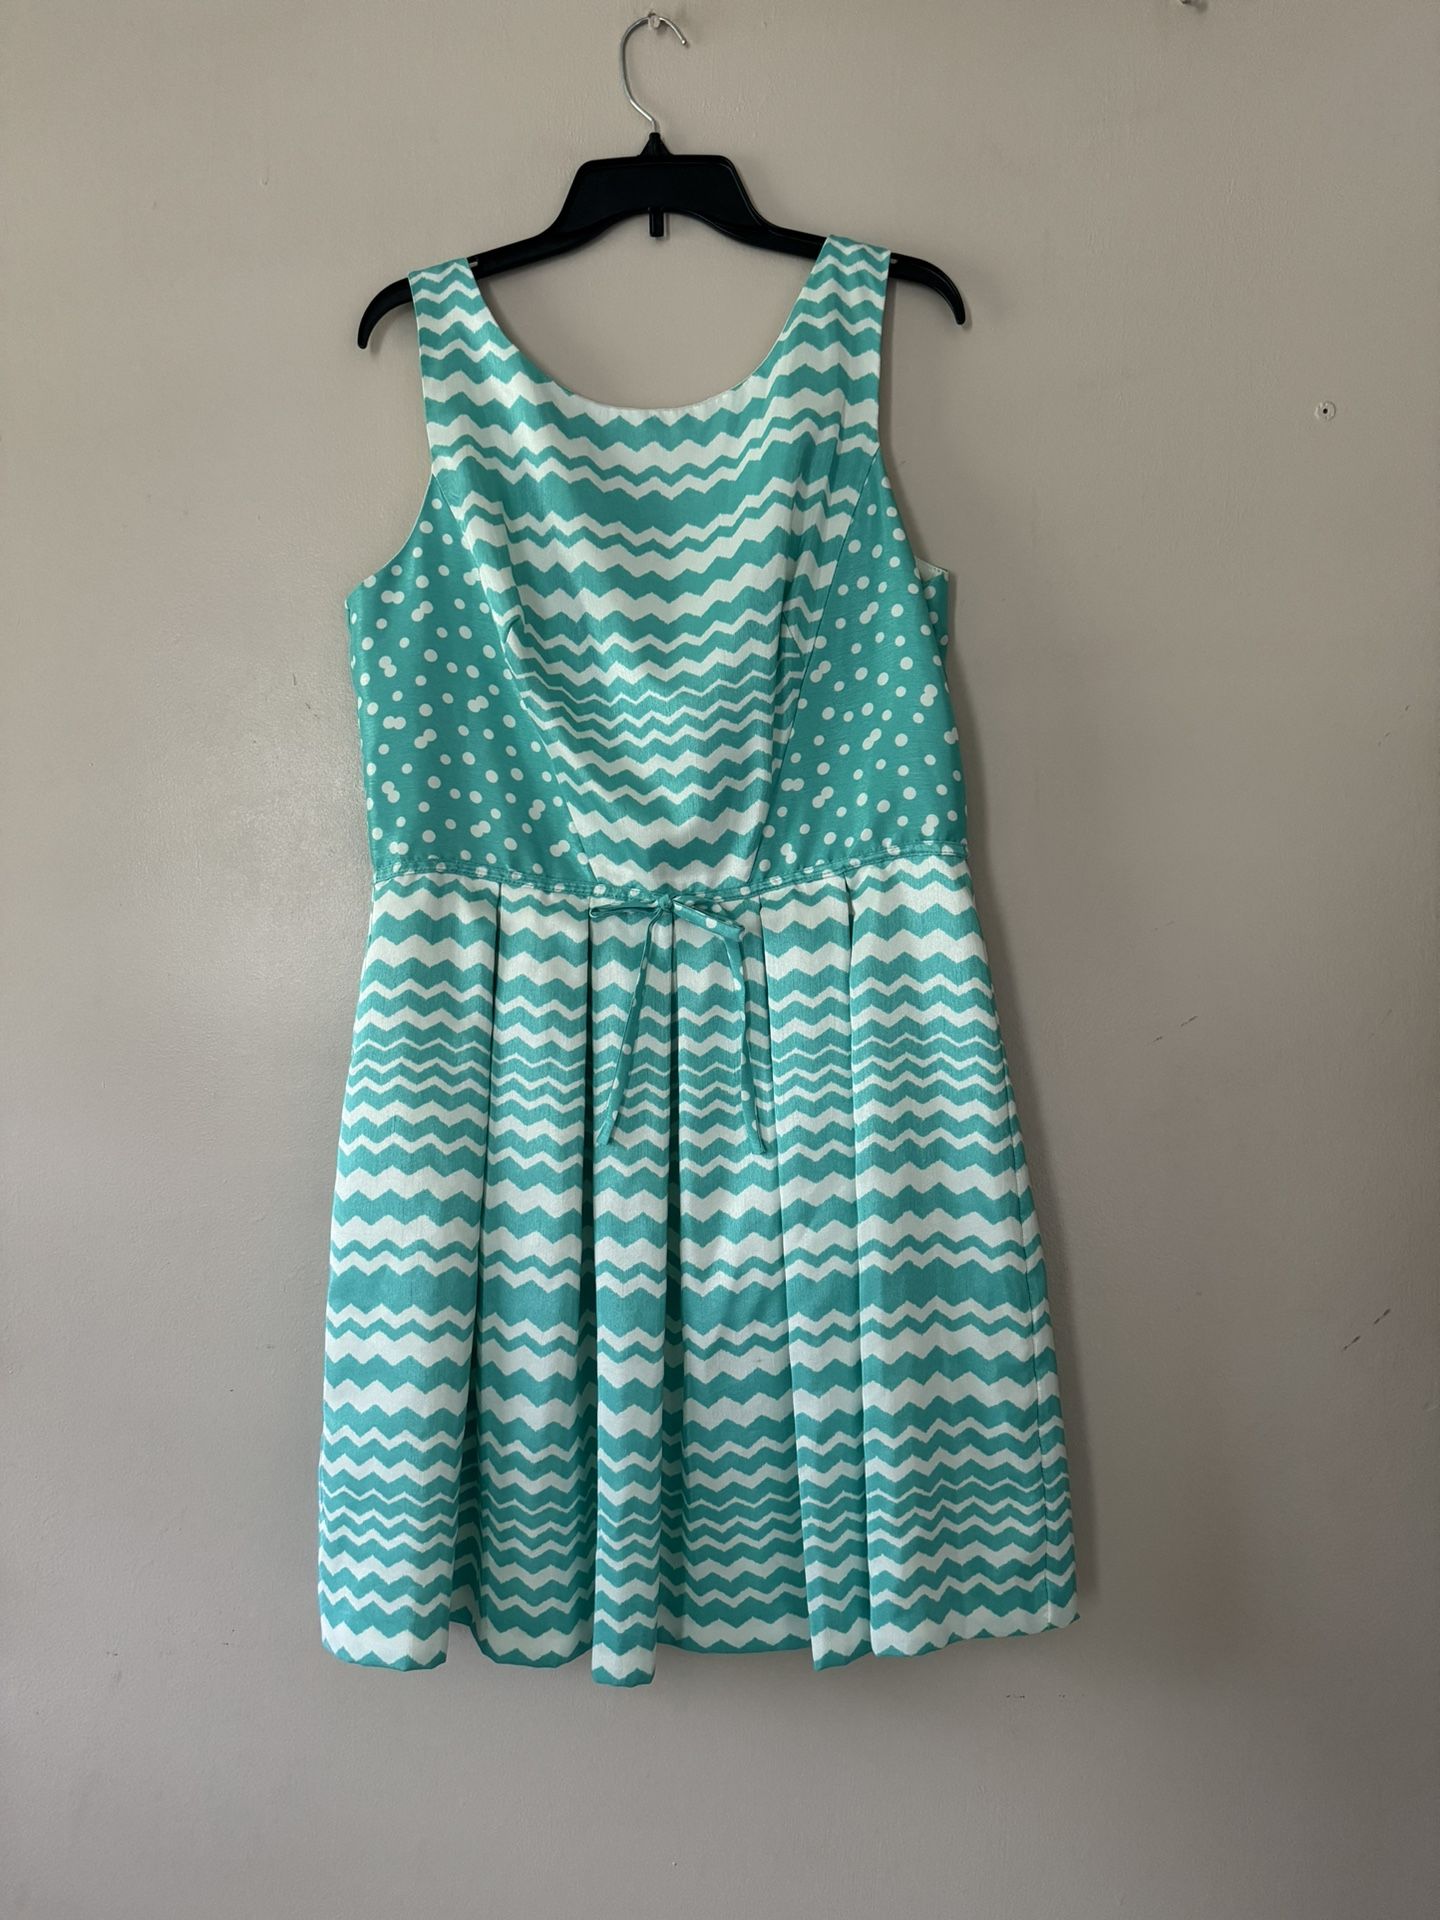 J Taylor Fit Flare party cocktails Dress size 16 summer sleeveless mint chevron